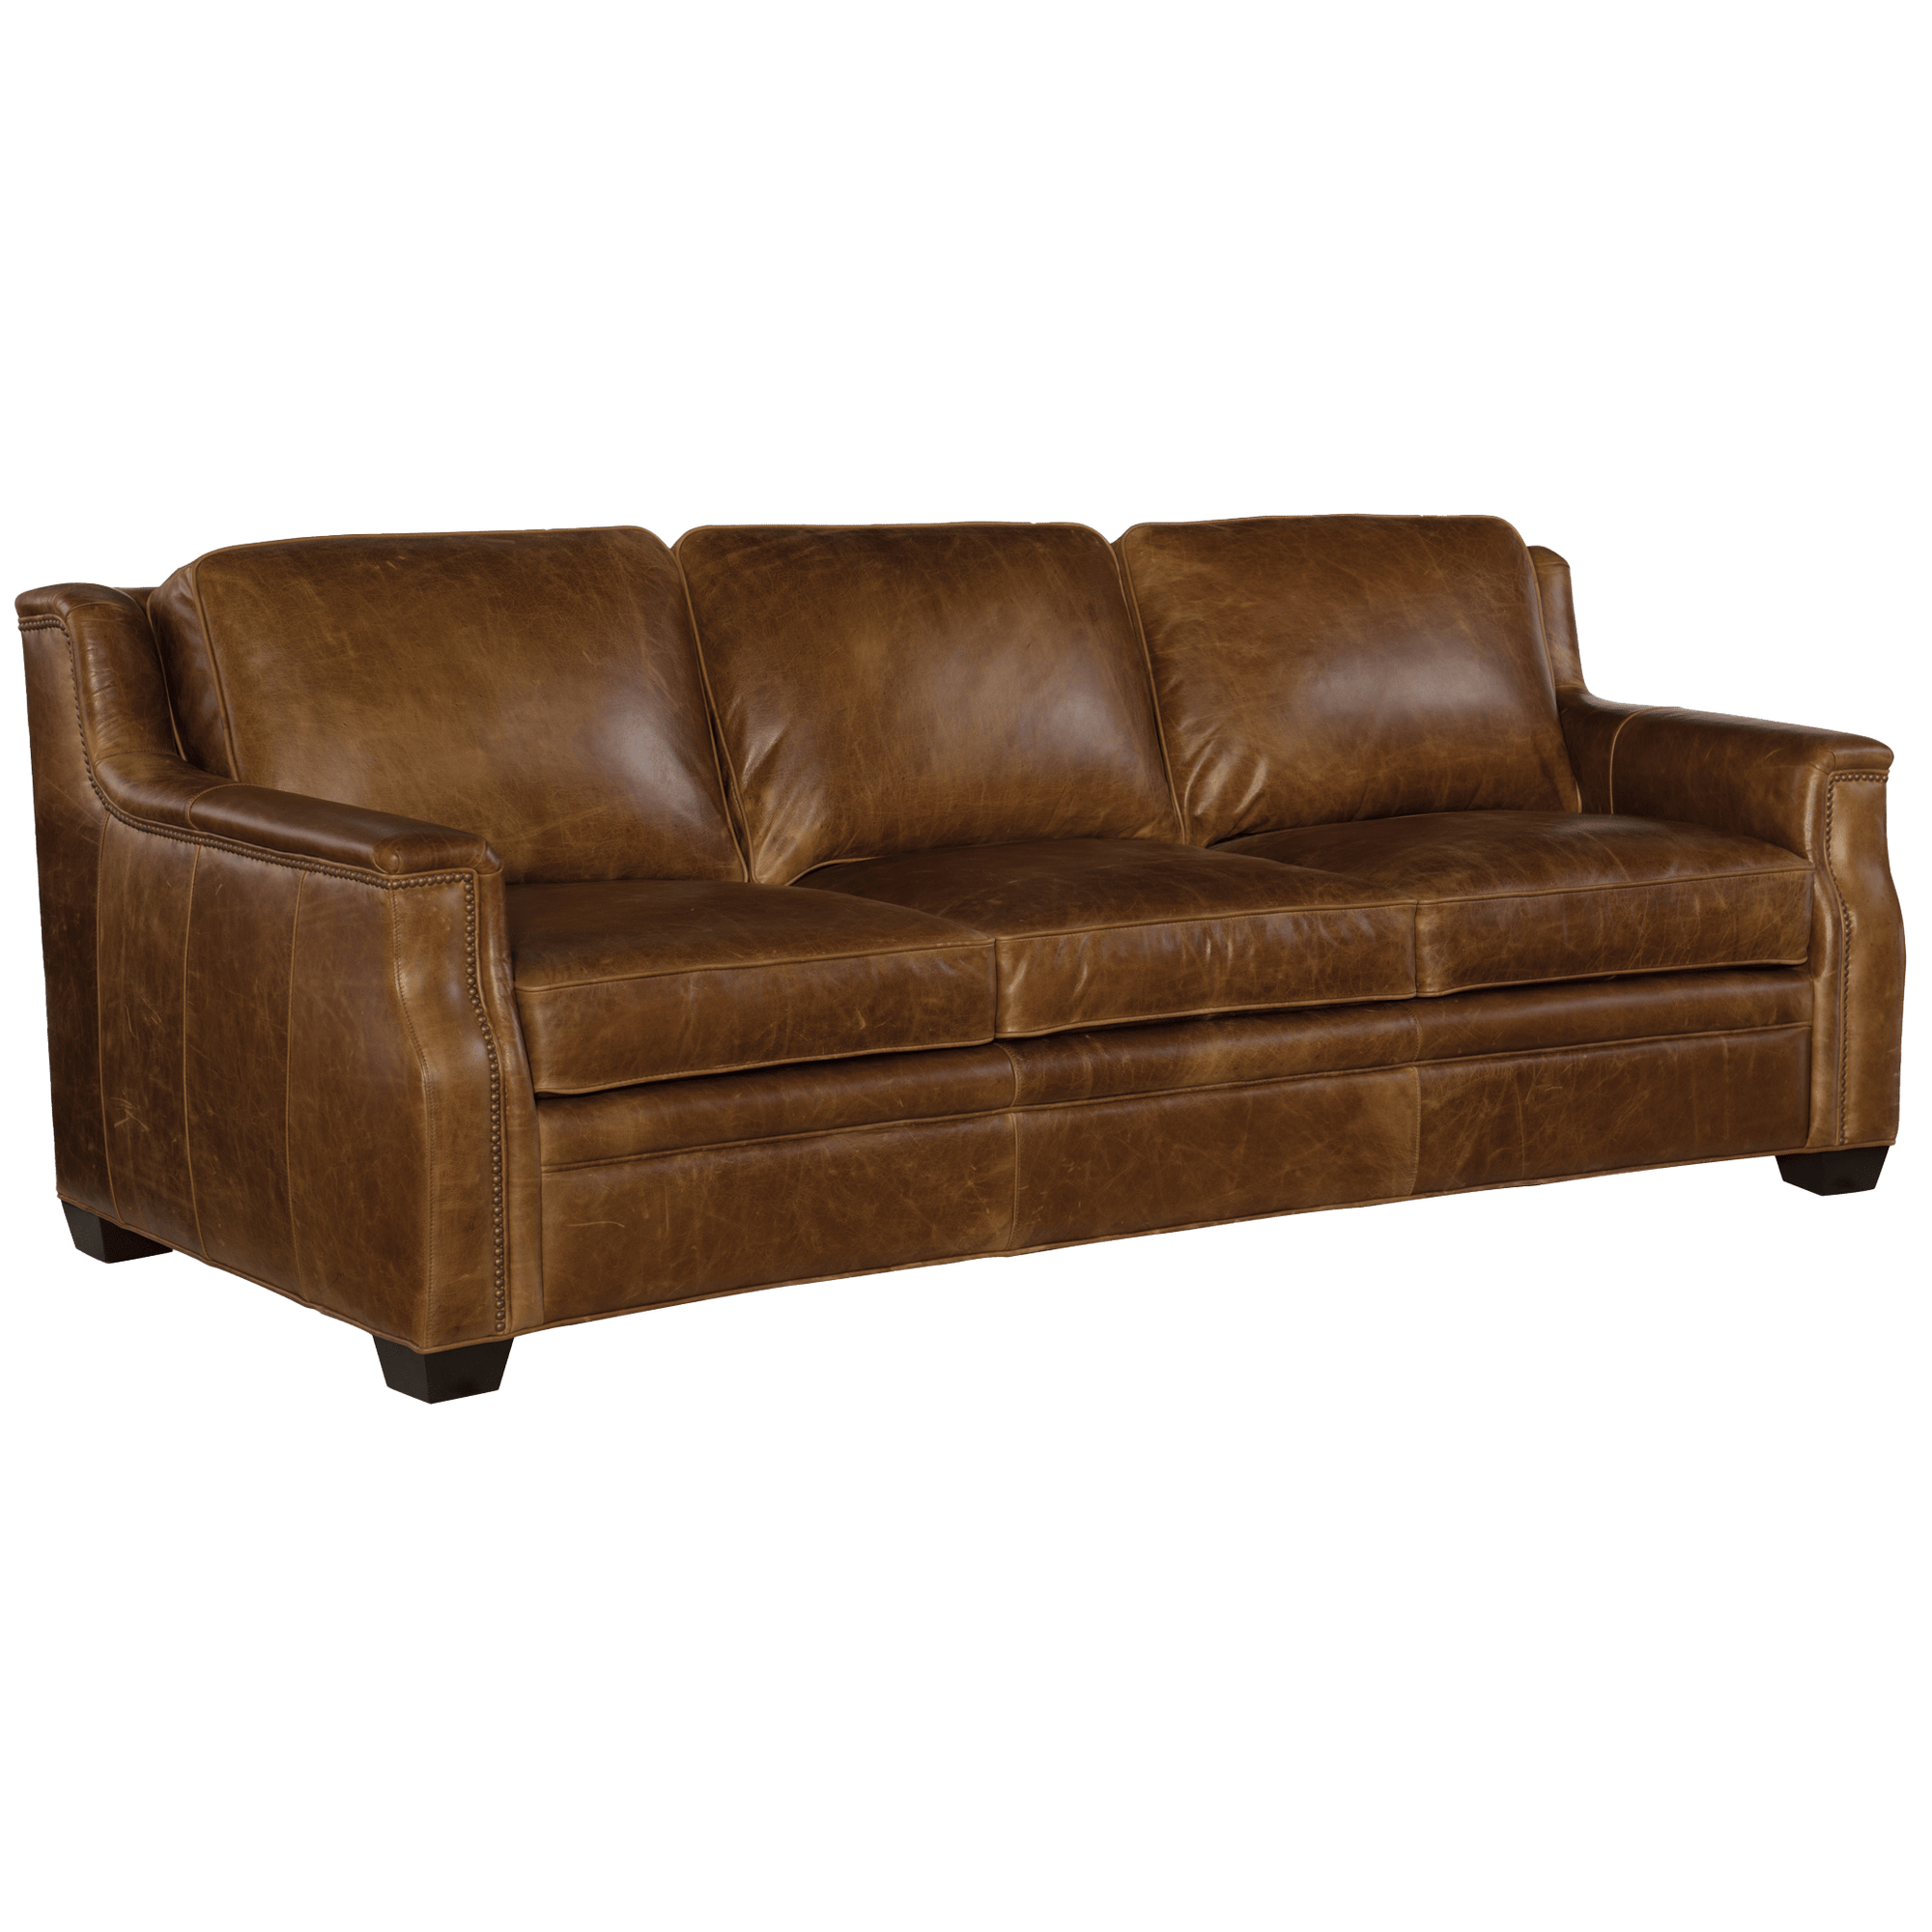 Yaron 92.5" Wide Upholstered Leather Sofa, Brown